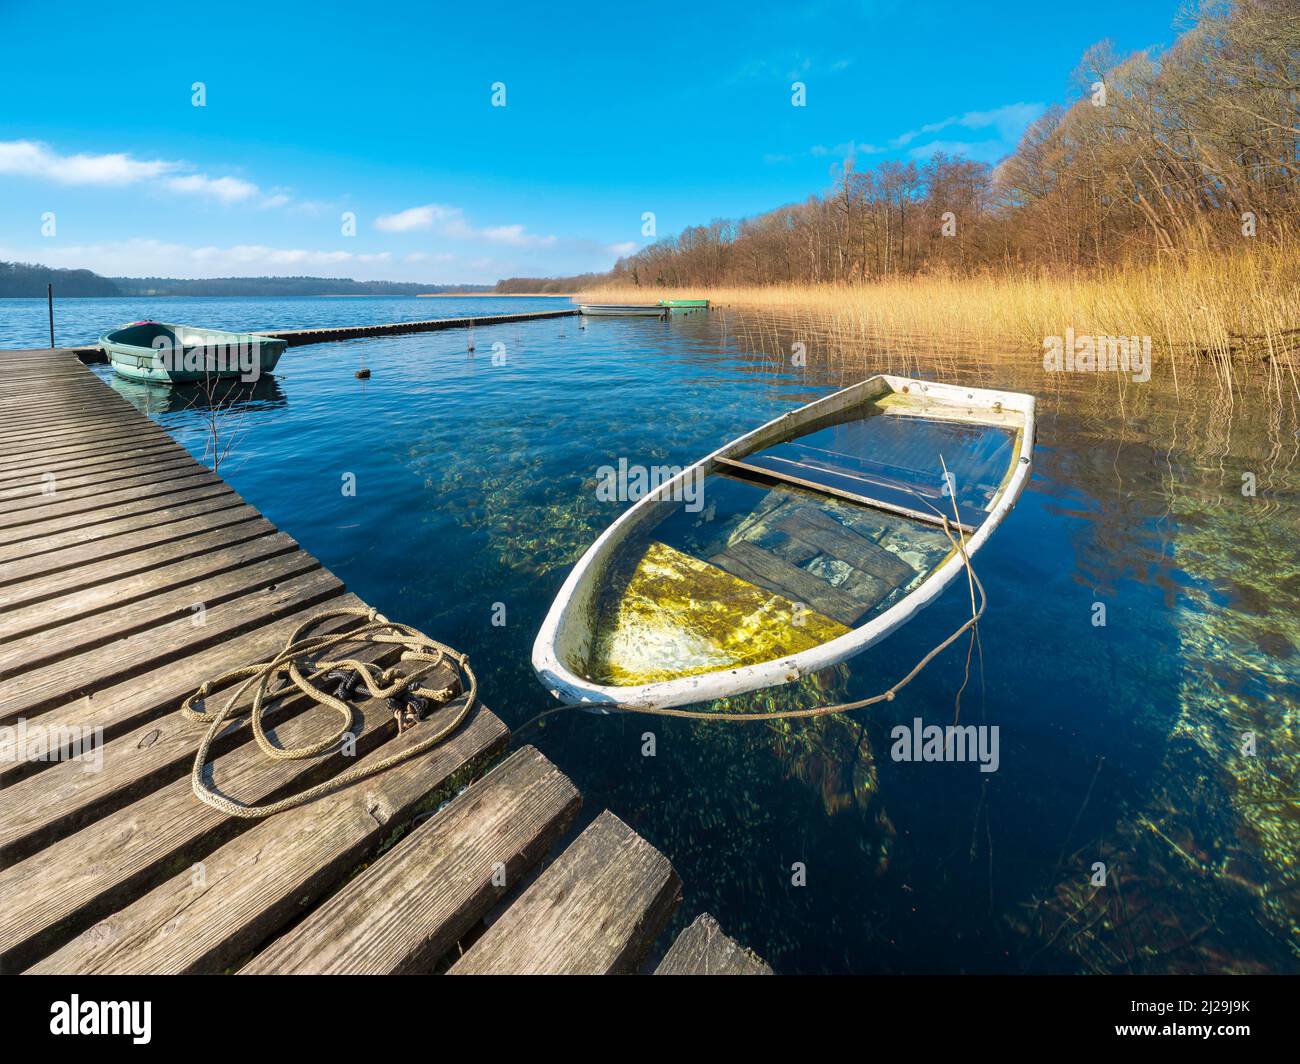 Sinking boat at Schaalsee, wooden jetty in the reeds with a rowing boat full of water, Schaalsee Biosphere Reserve, Mecklenburg-Western Pomerania Stock Photo